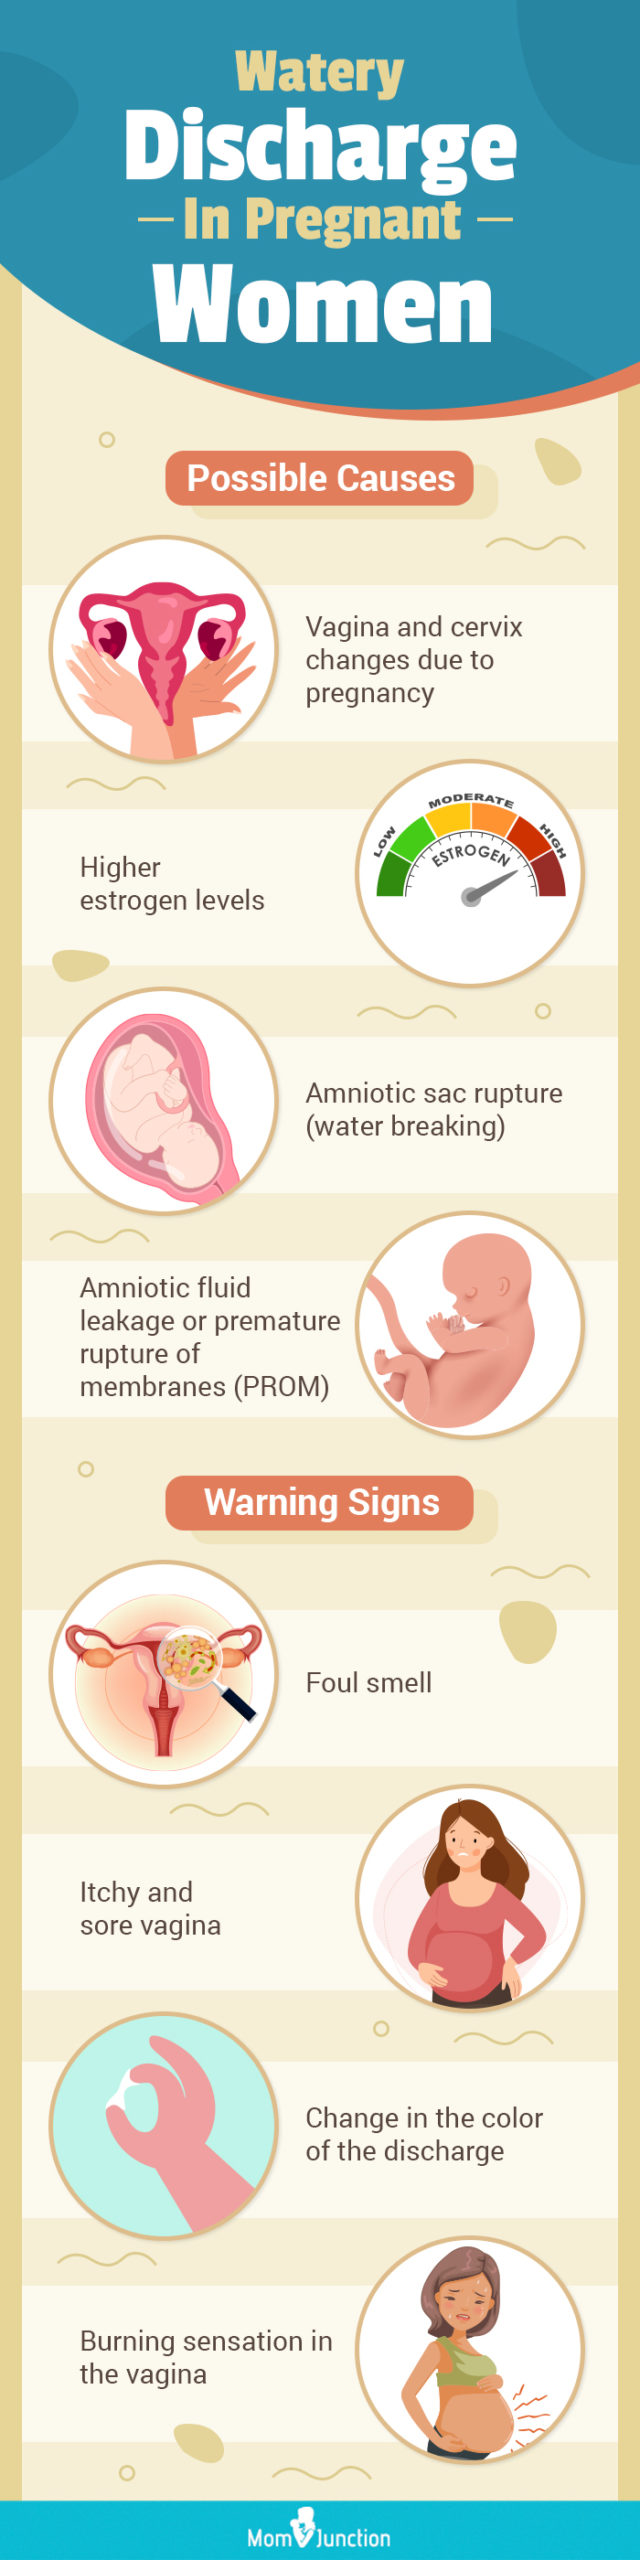 Is Having A Watery Discharge During Pregnancy Normal?